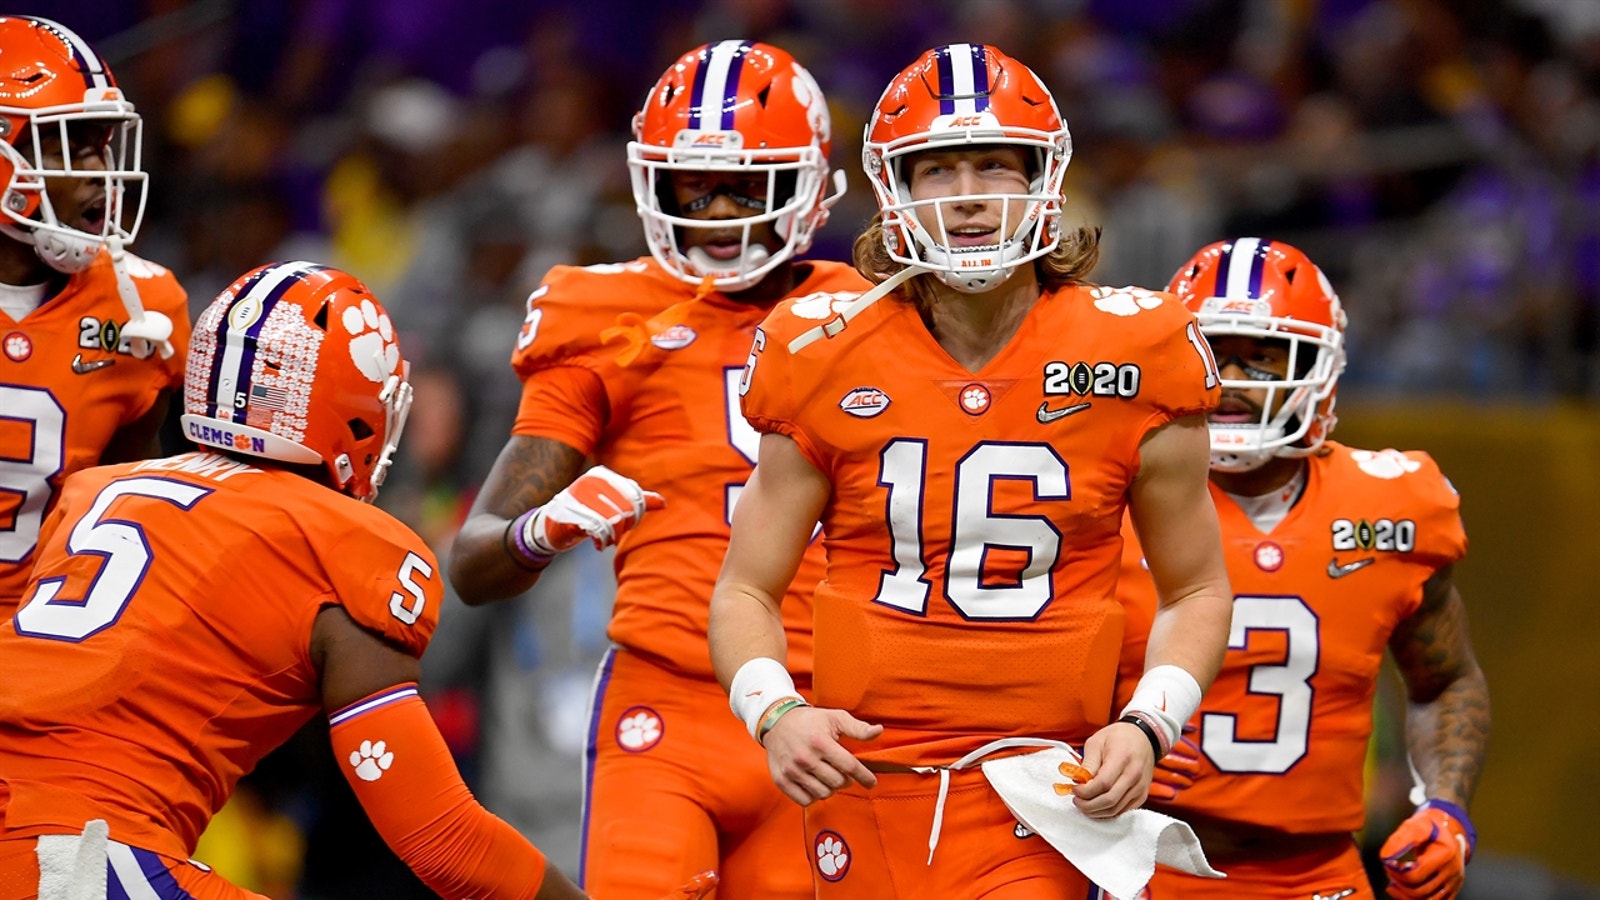 Urban Meyer on Trevor Lawrence: 'You can't put a price tag on experience and confidence'